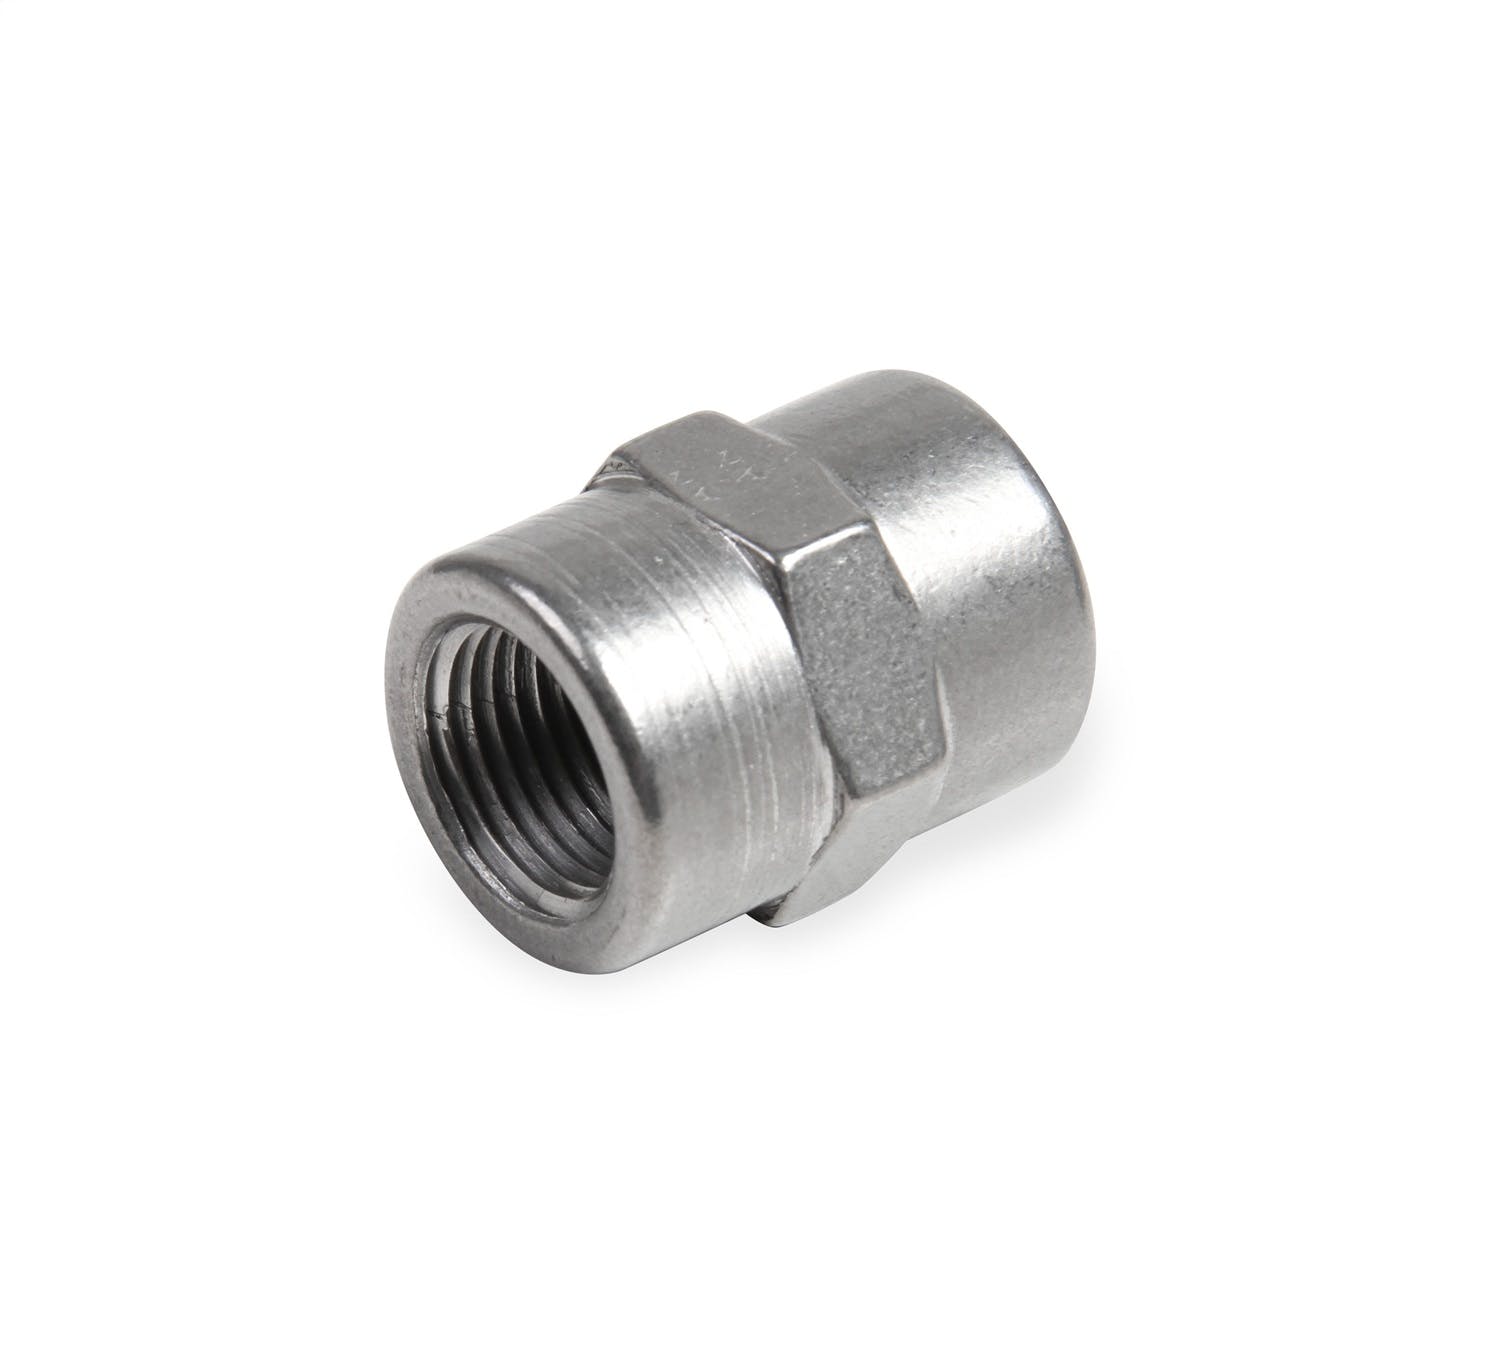 Earl's Performance Plumbing SS991003ERL 3/8 NPT COUPLING  STAINLESS STEEL